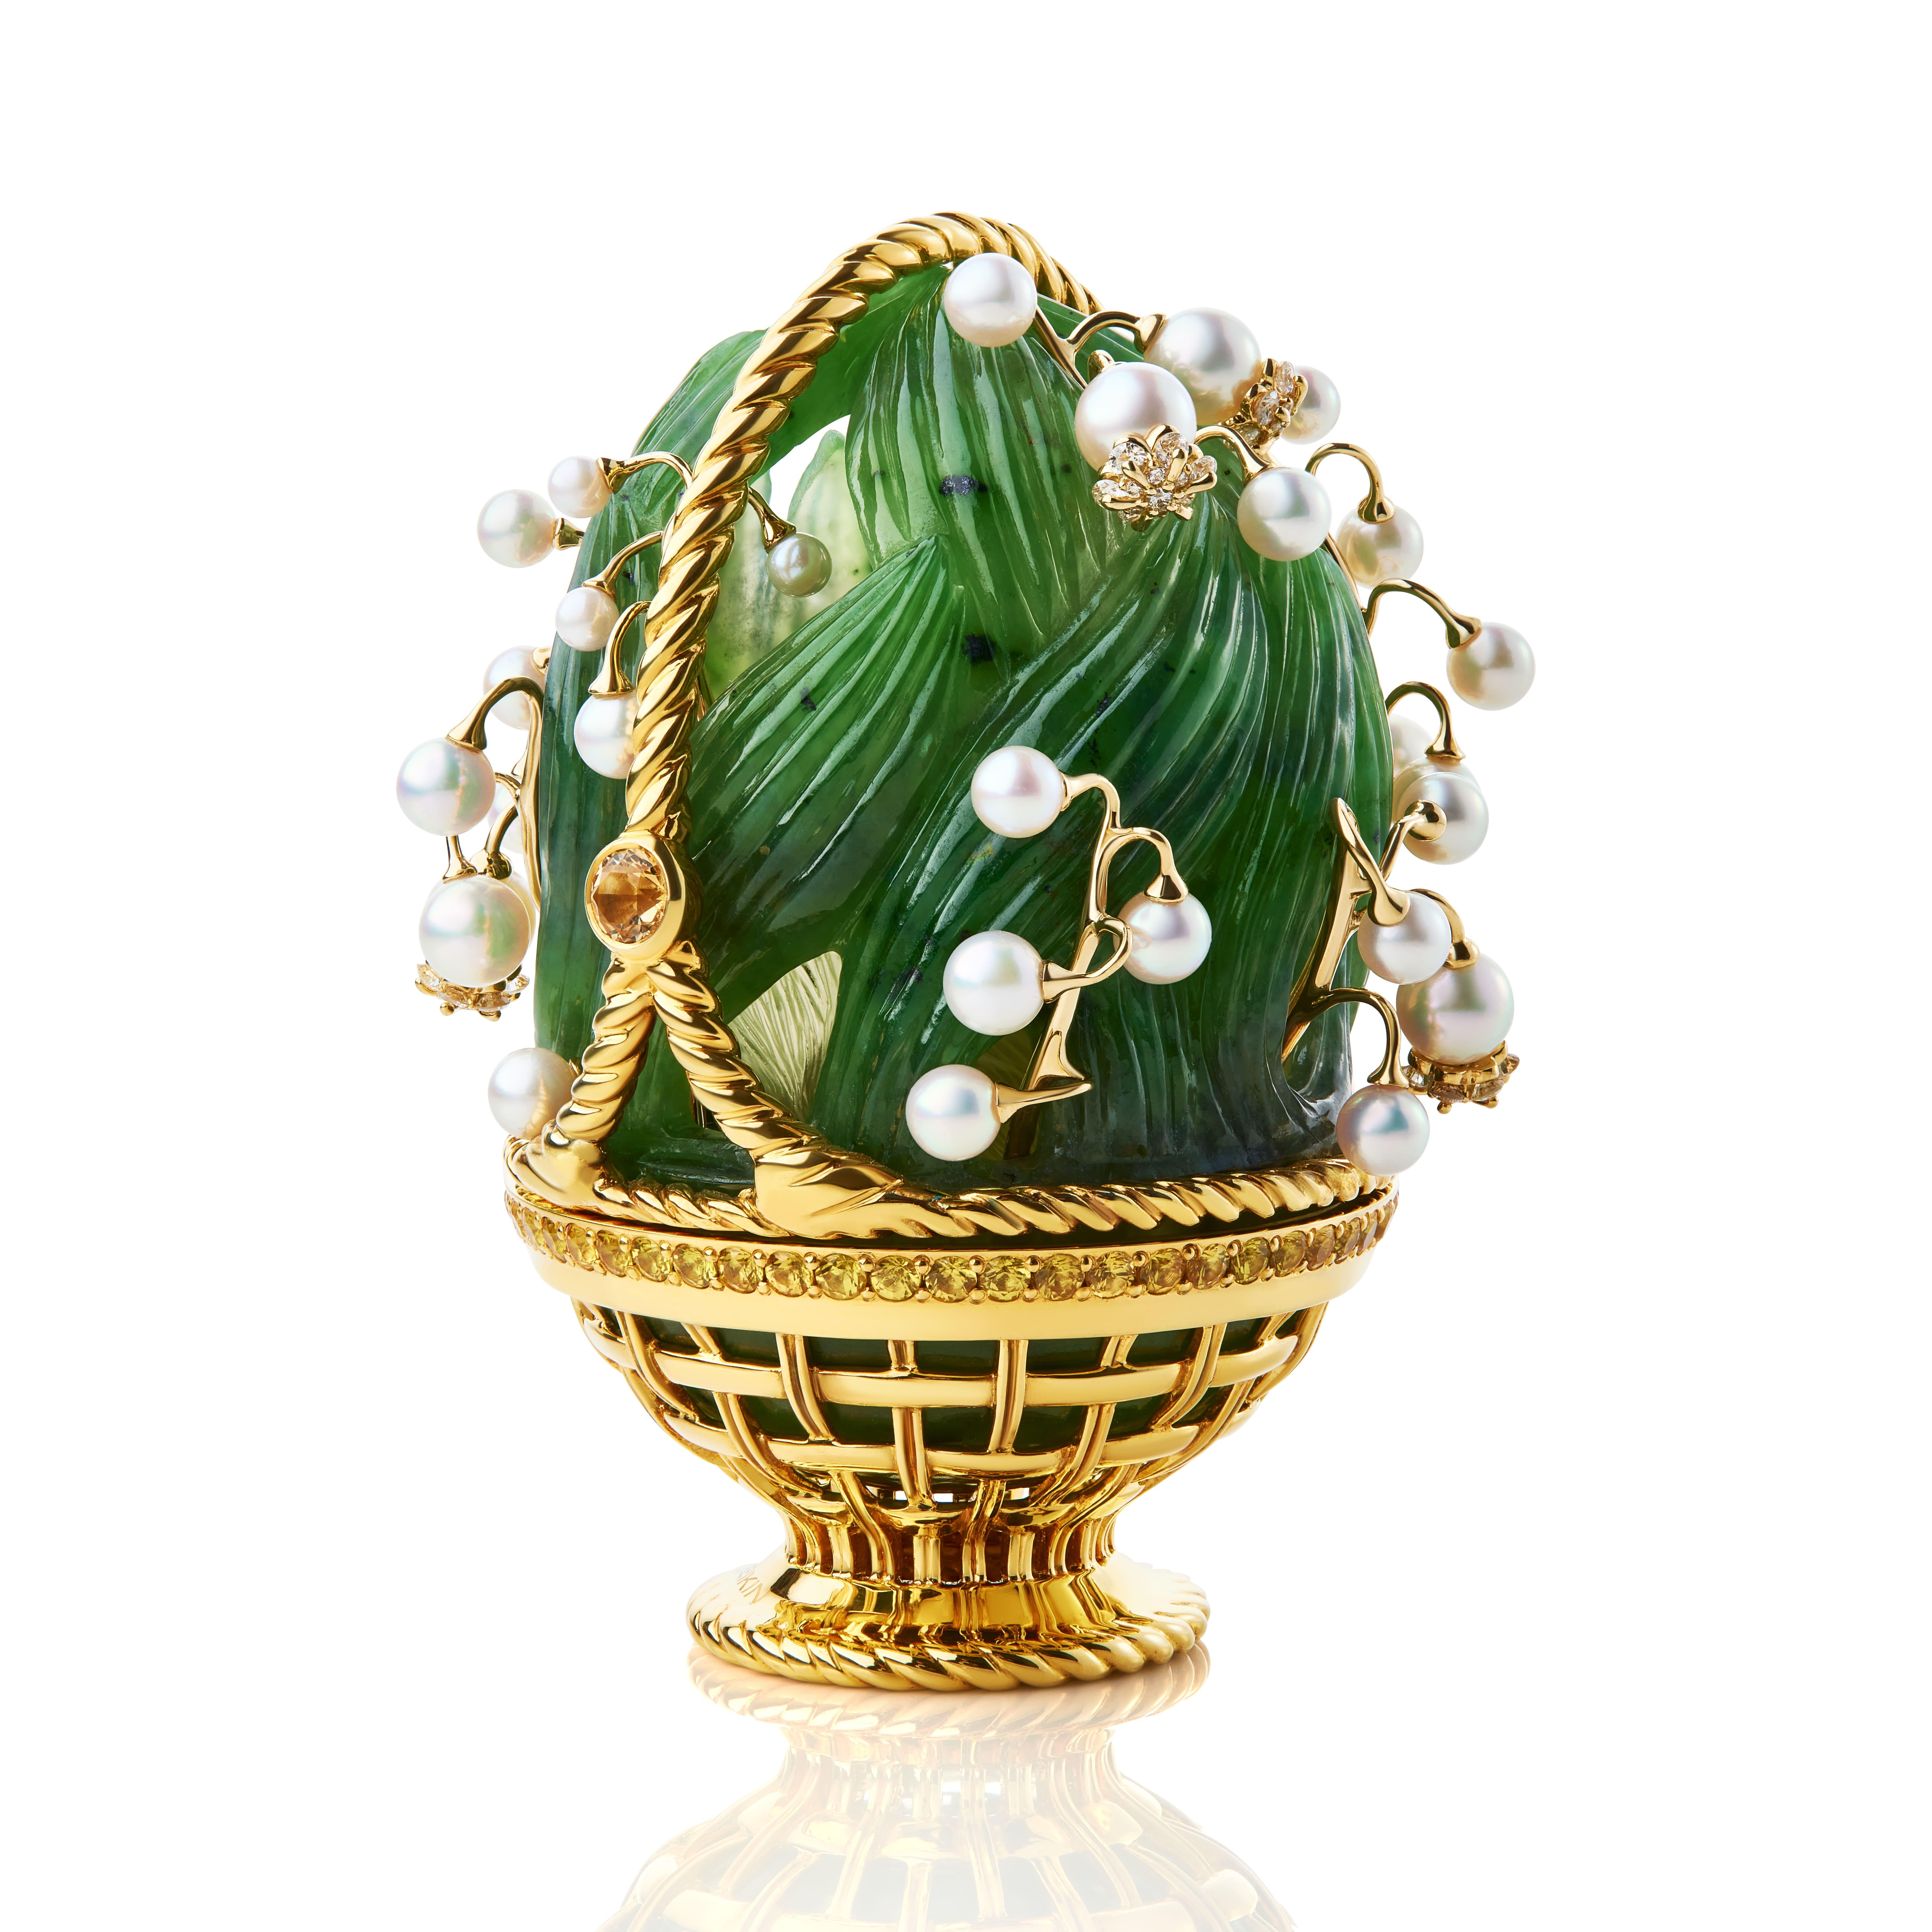 The Lilies of the valley Easter egg miniature by MOISEIKIN is a new level of jewellery architecture created to commemorate the house's 30th anniversary. It allows you to see the beauty of the stone and refine craftsmanship in the light not seen in